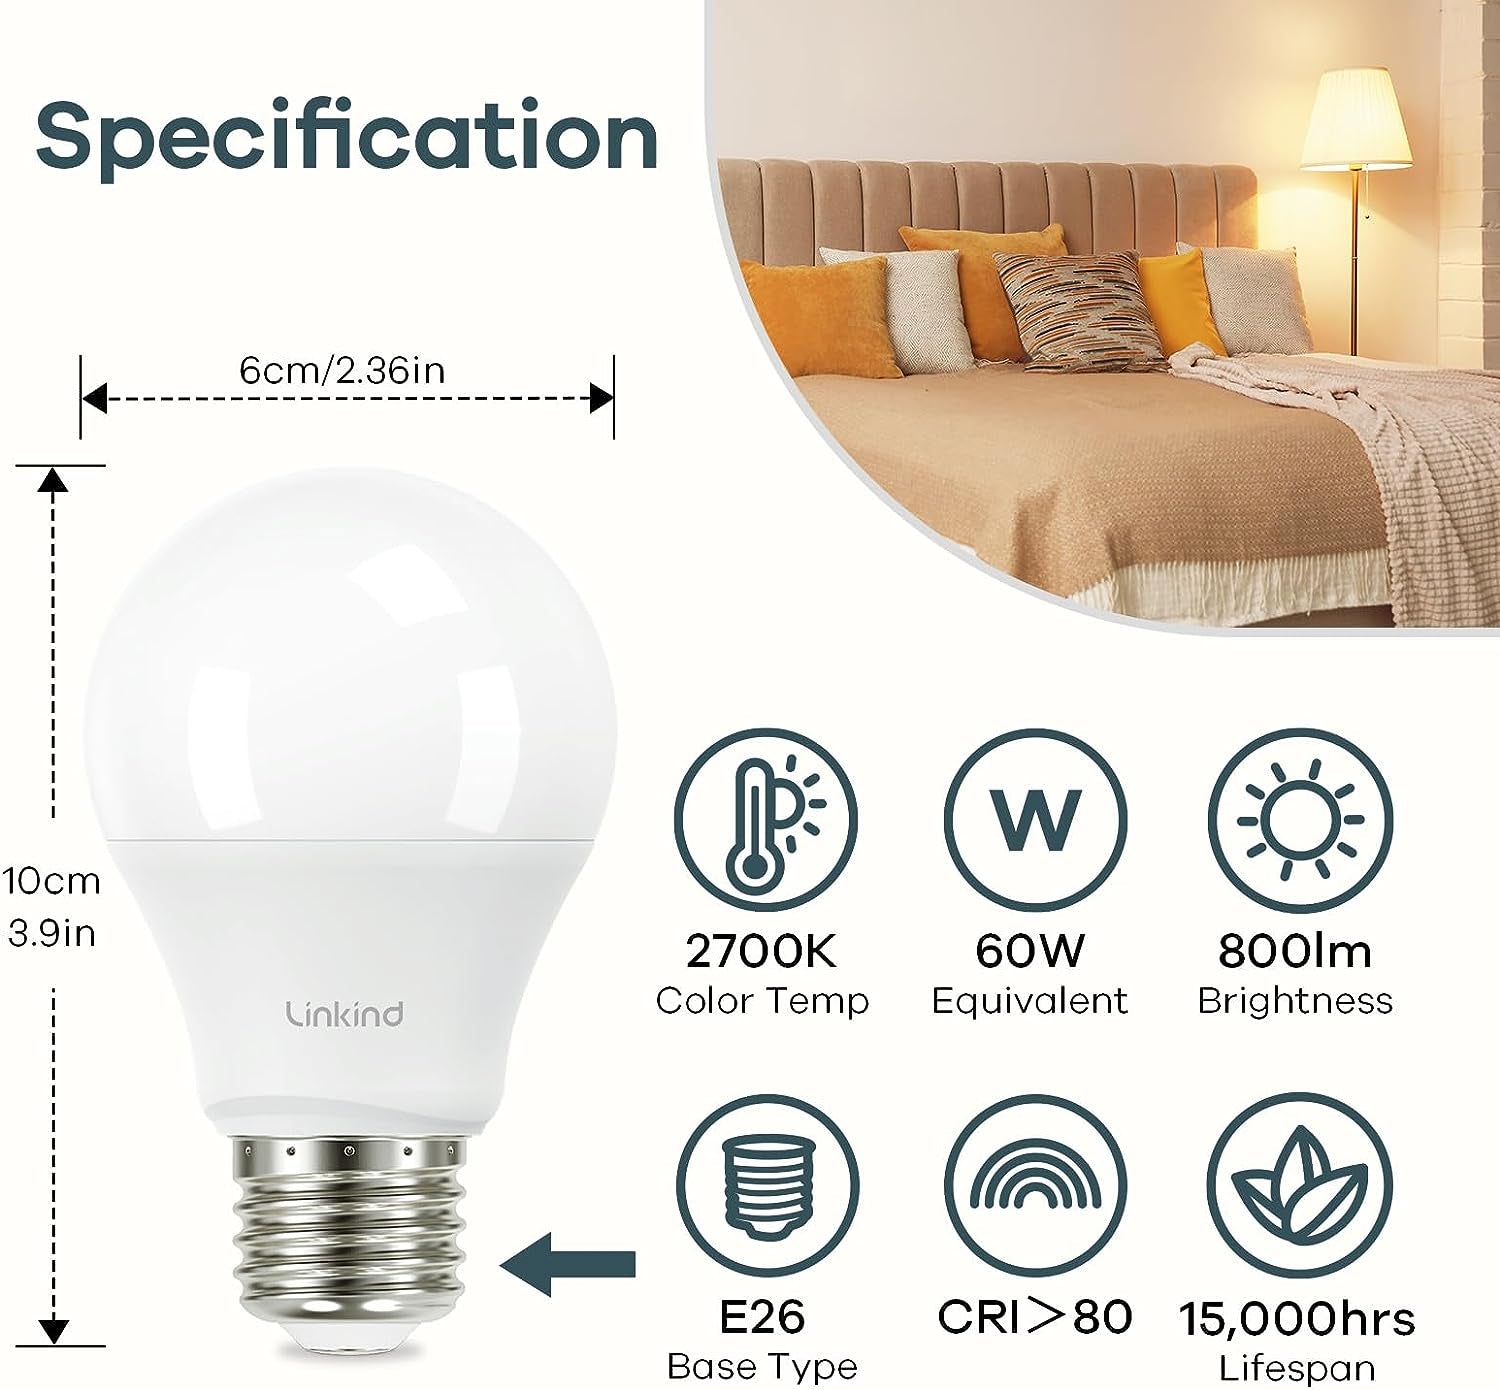 A19 LED Light Bulb, 60W Equivalent, 9W 2700K Soft White, 800 Lumens Non-Dimmable, E26 Standard Base, Energy Efficient UL Listed for Bedroom Home Office, 6 Pack